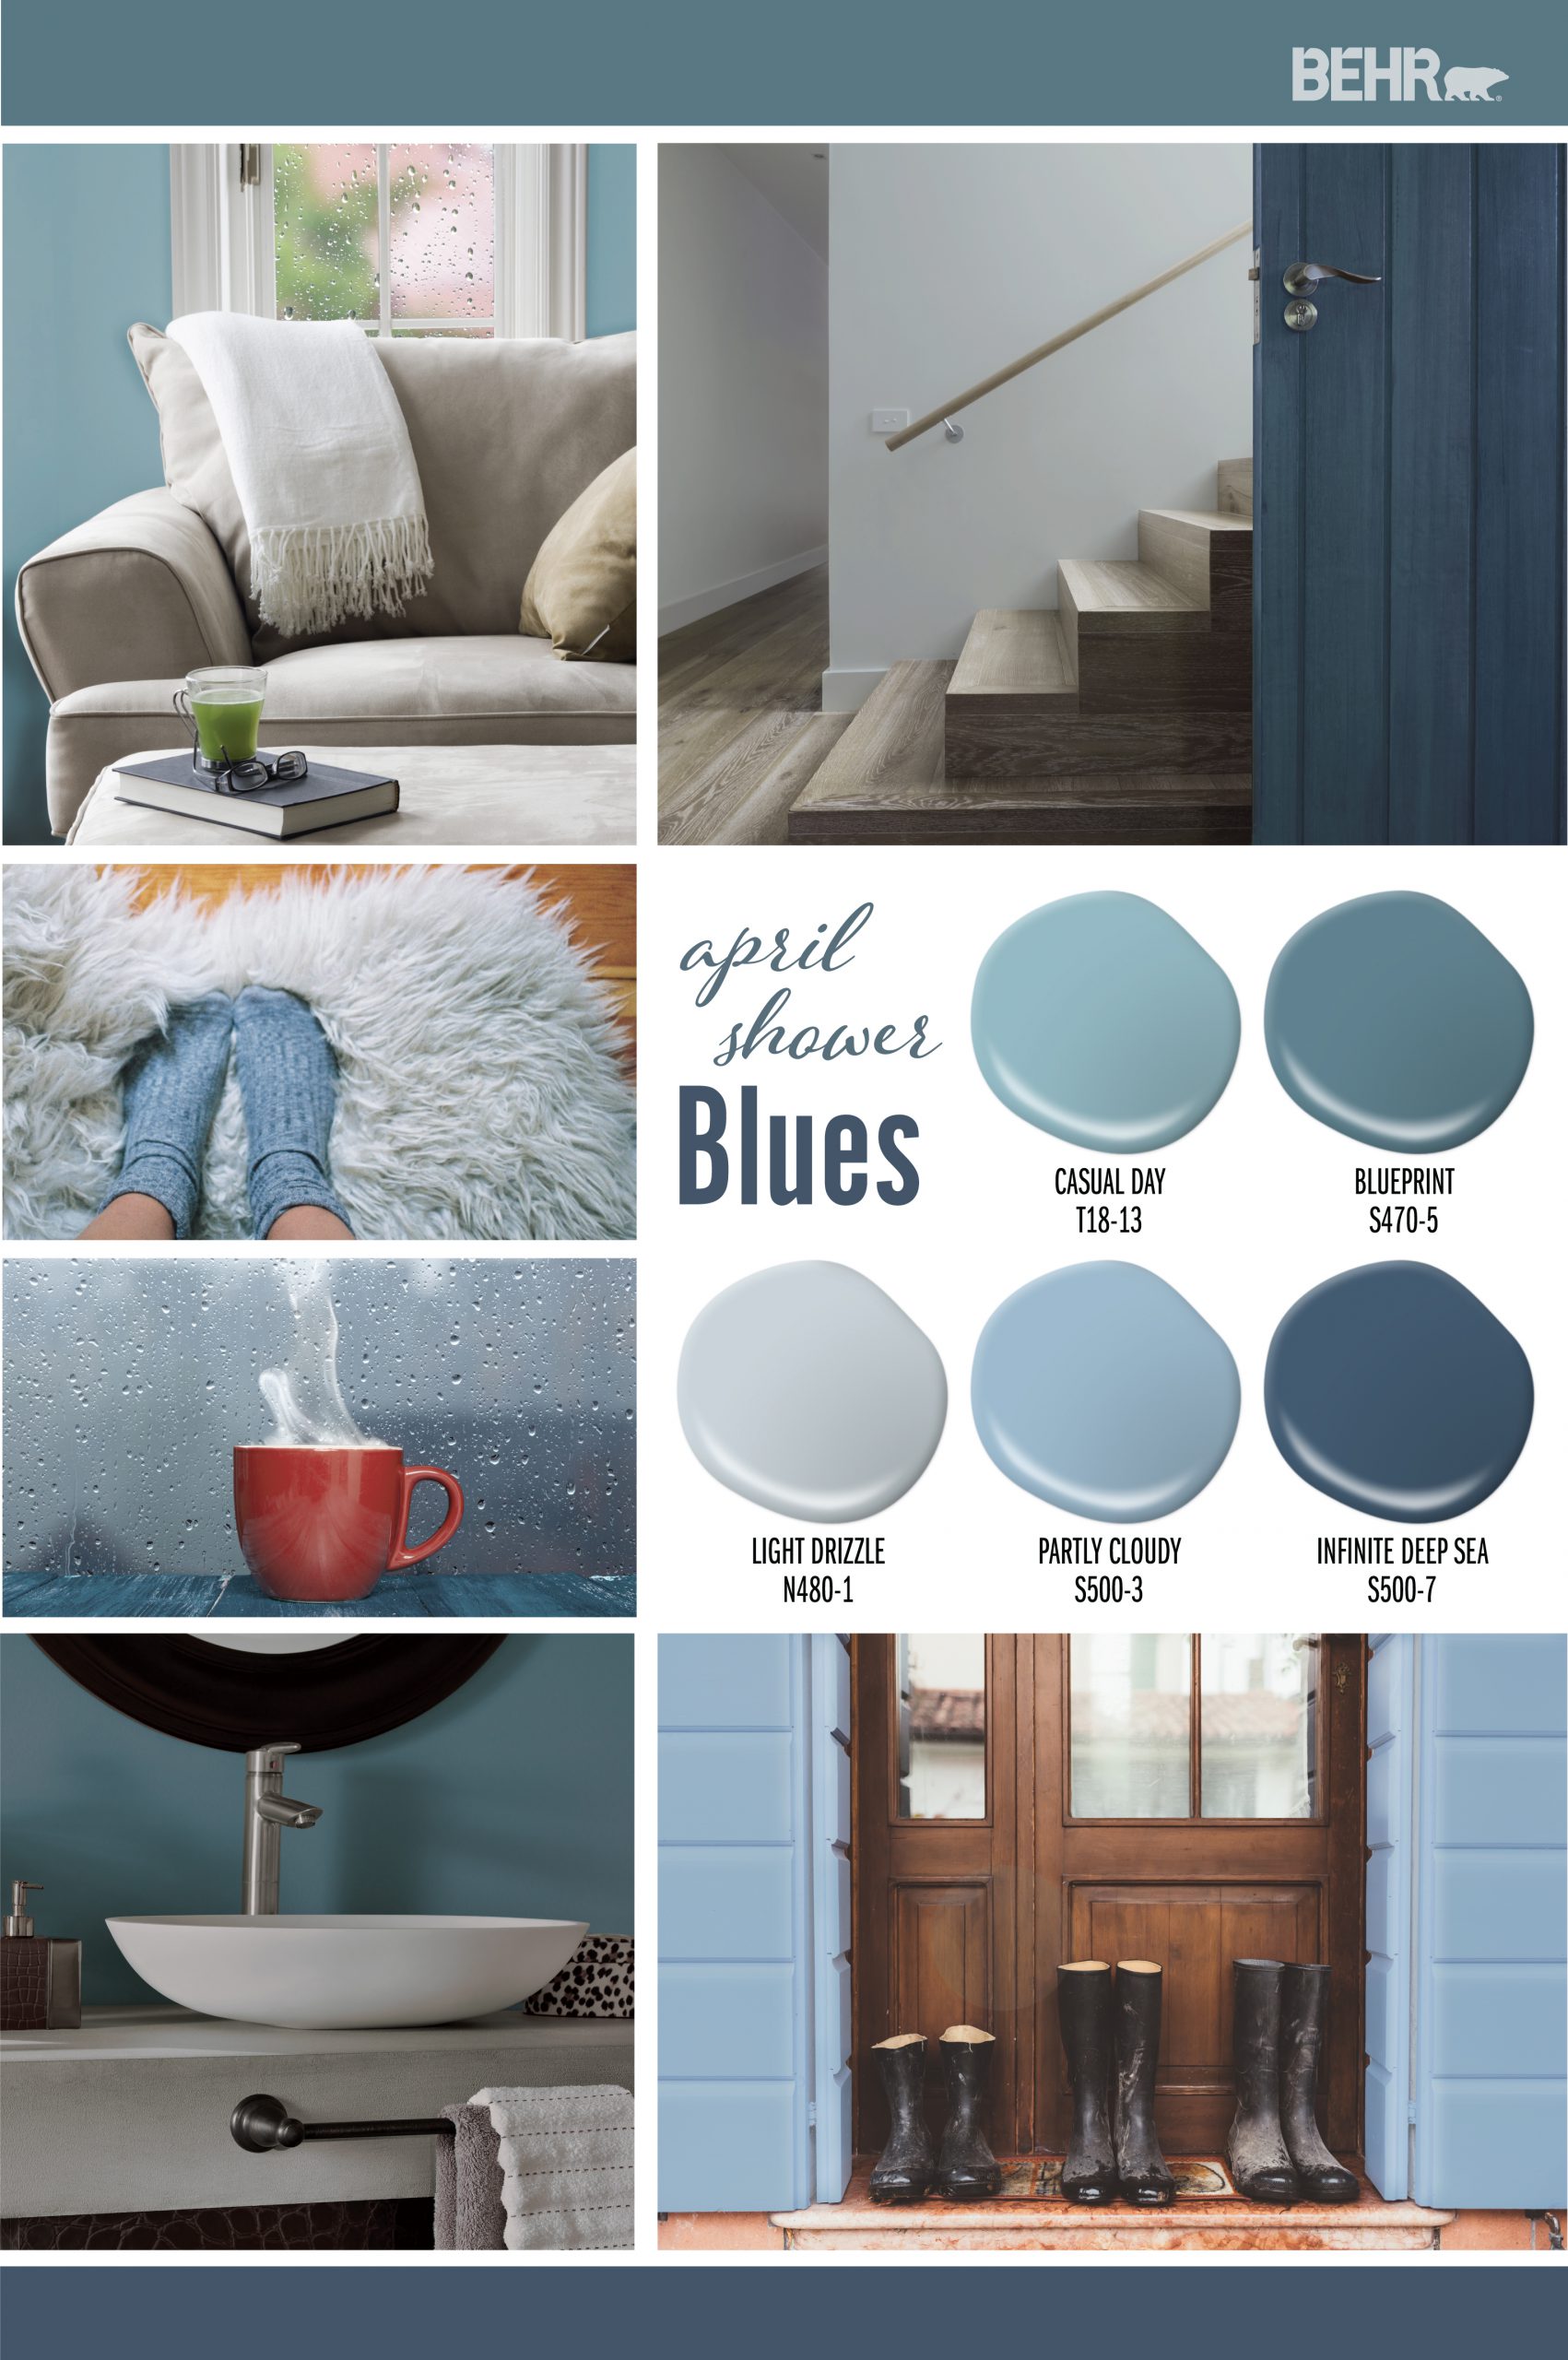 Inspiration Board featuring five blue paint drops: Casual Day, Blueprint, Light Drizzle, Partly Cloudy, Infinite Deep Sea Images shown are the following: -A close shot of a chair in a room with the wall painted in Casual Day. -A stairway with wood floor steps. Wall going up the stairs is painted in Light Drizzle. Door in front of stairs is painted in Infinite Deep Sea. -Feet in socks standing on a fluffy rug. -A red cup of steaming coffee. Cup is against a window that is wet from the rain outside. -A close up view of a bathroom sink and top of counter with the wall painted in Blueprint. -Exterior entryway with boots in front of the door. The house is painted in Partly Cloud.